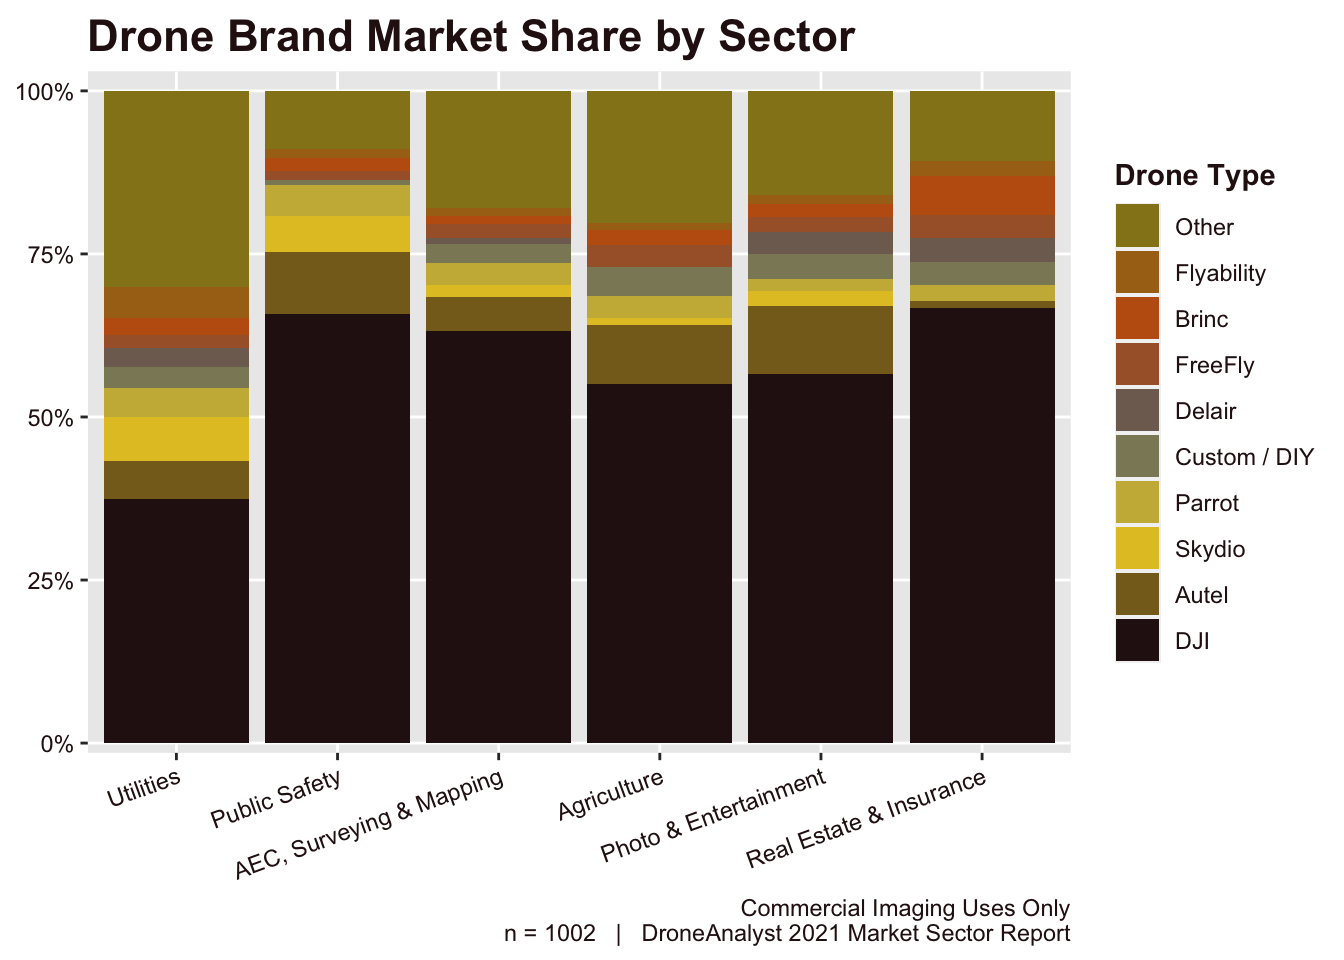 Drone Brand Market Share by Sector